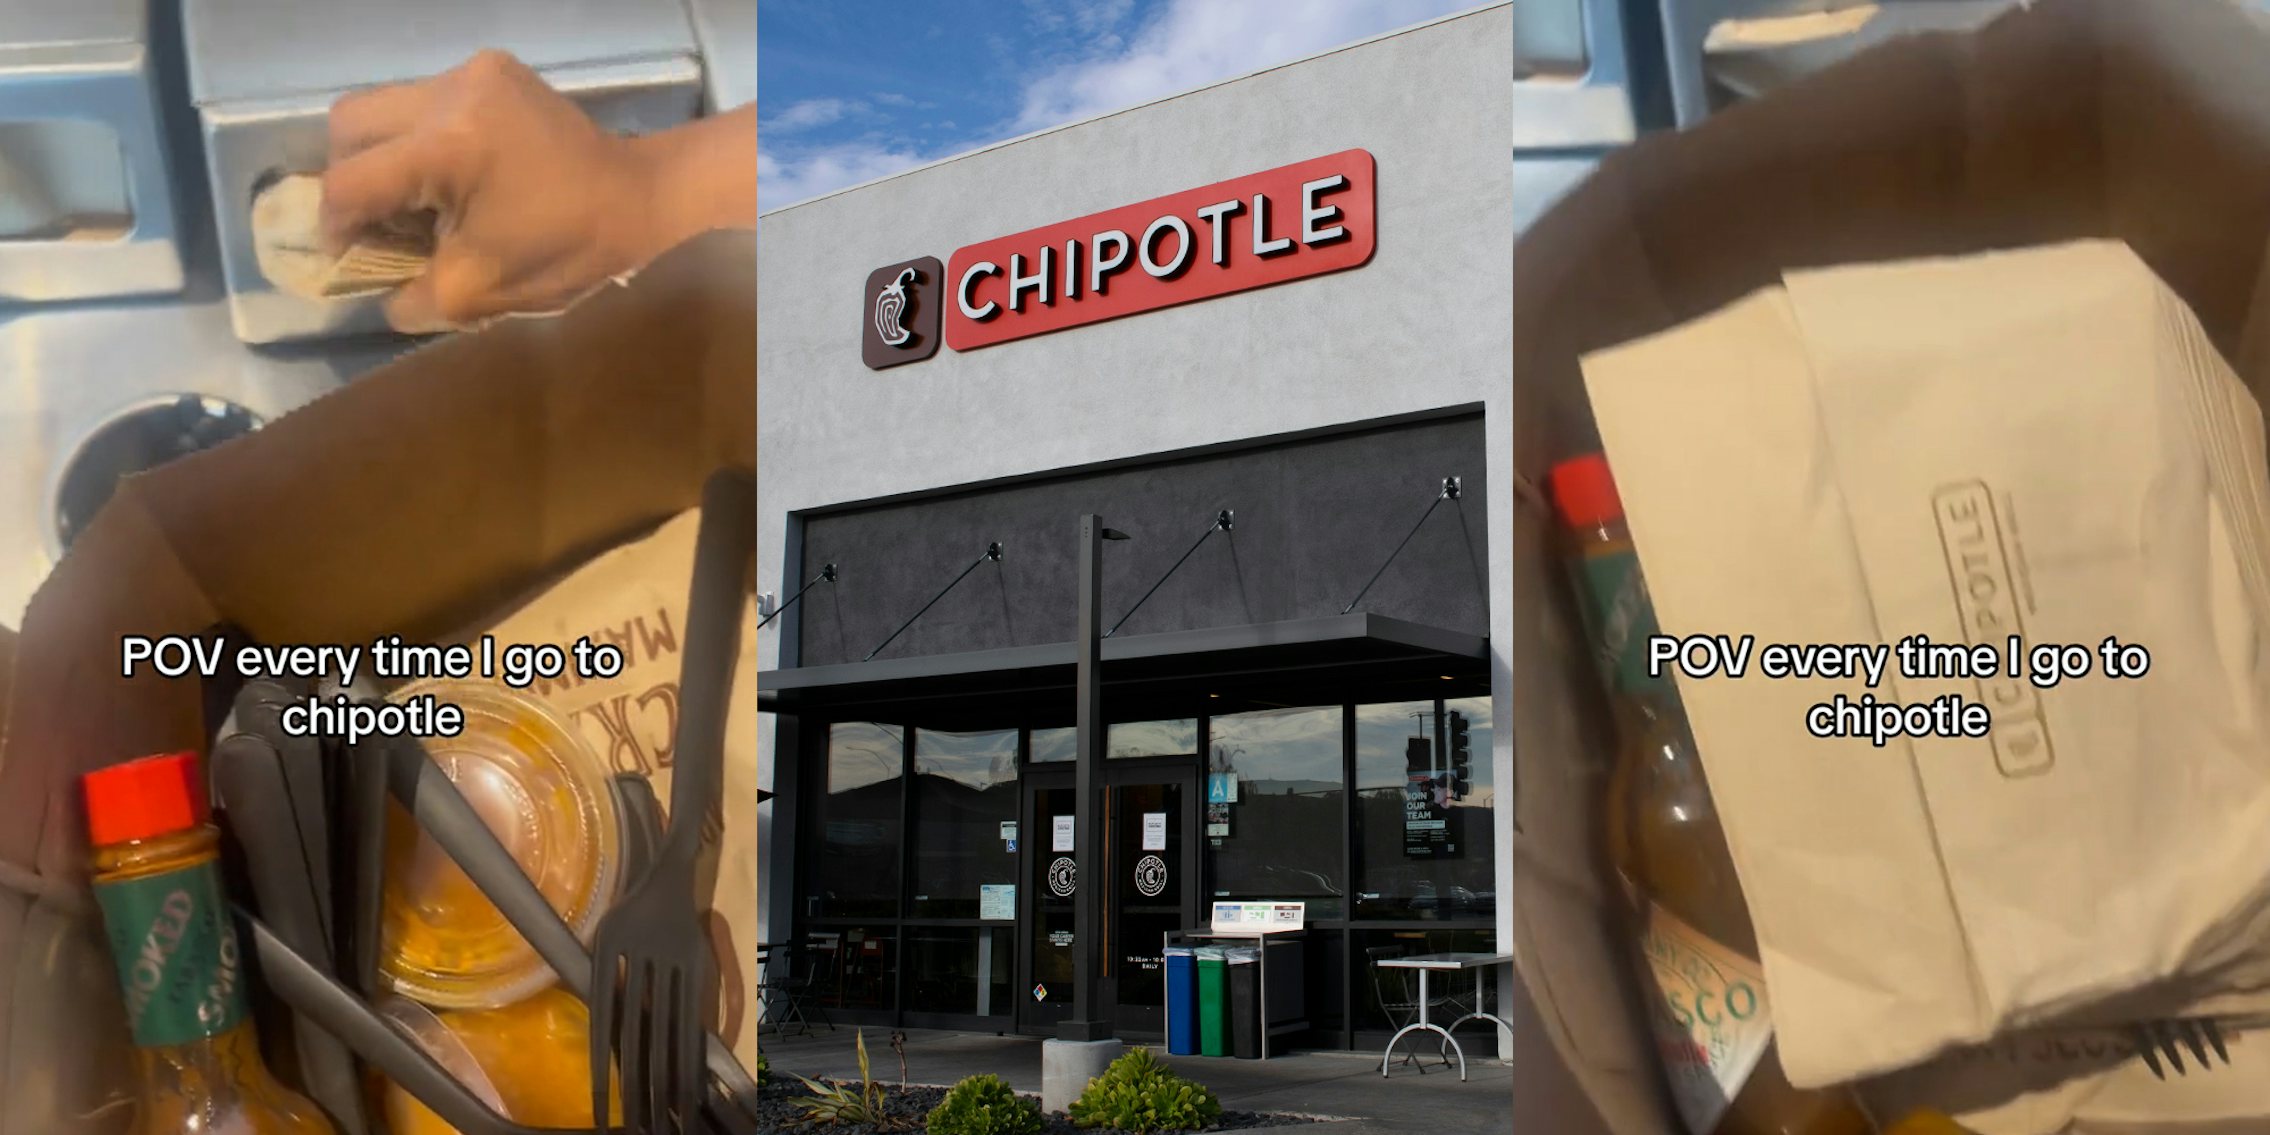 Chipotle customer grabbing pile of napkins with caption 'POV every time I go to chipotle' (l) Chipotle building with sign (c) Chipotle bag full with caption 'POV every time I go to Chipotle' (r)